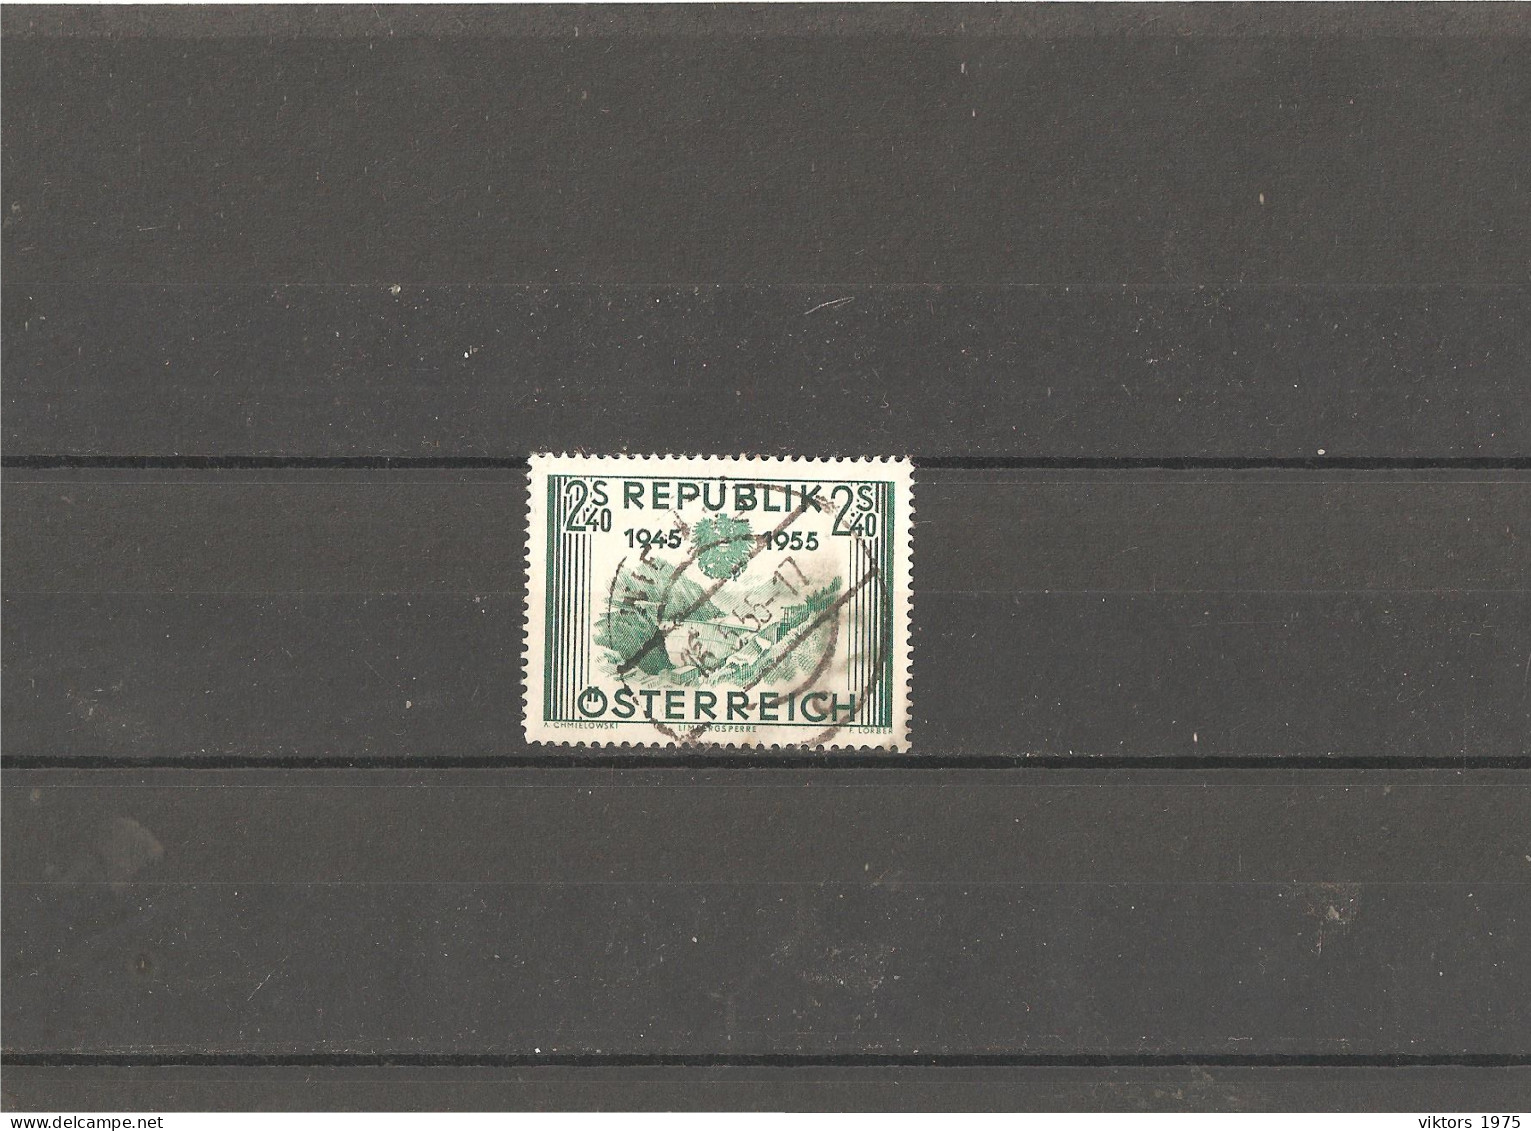 Used Stamp Nr.1016 In MICHEL Catalog - Used Stamps